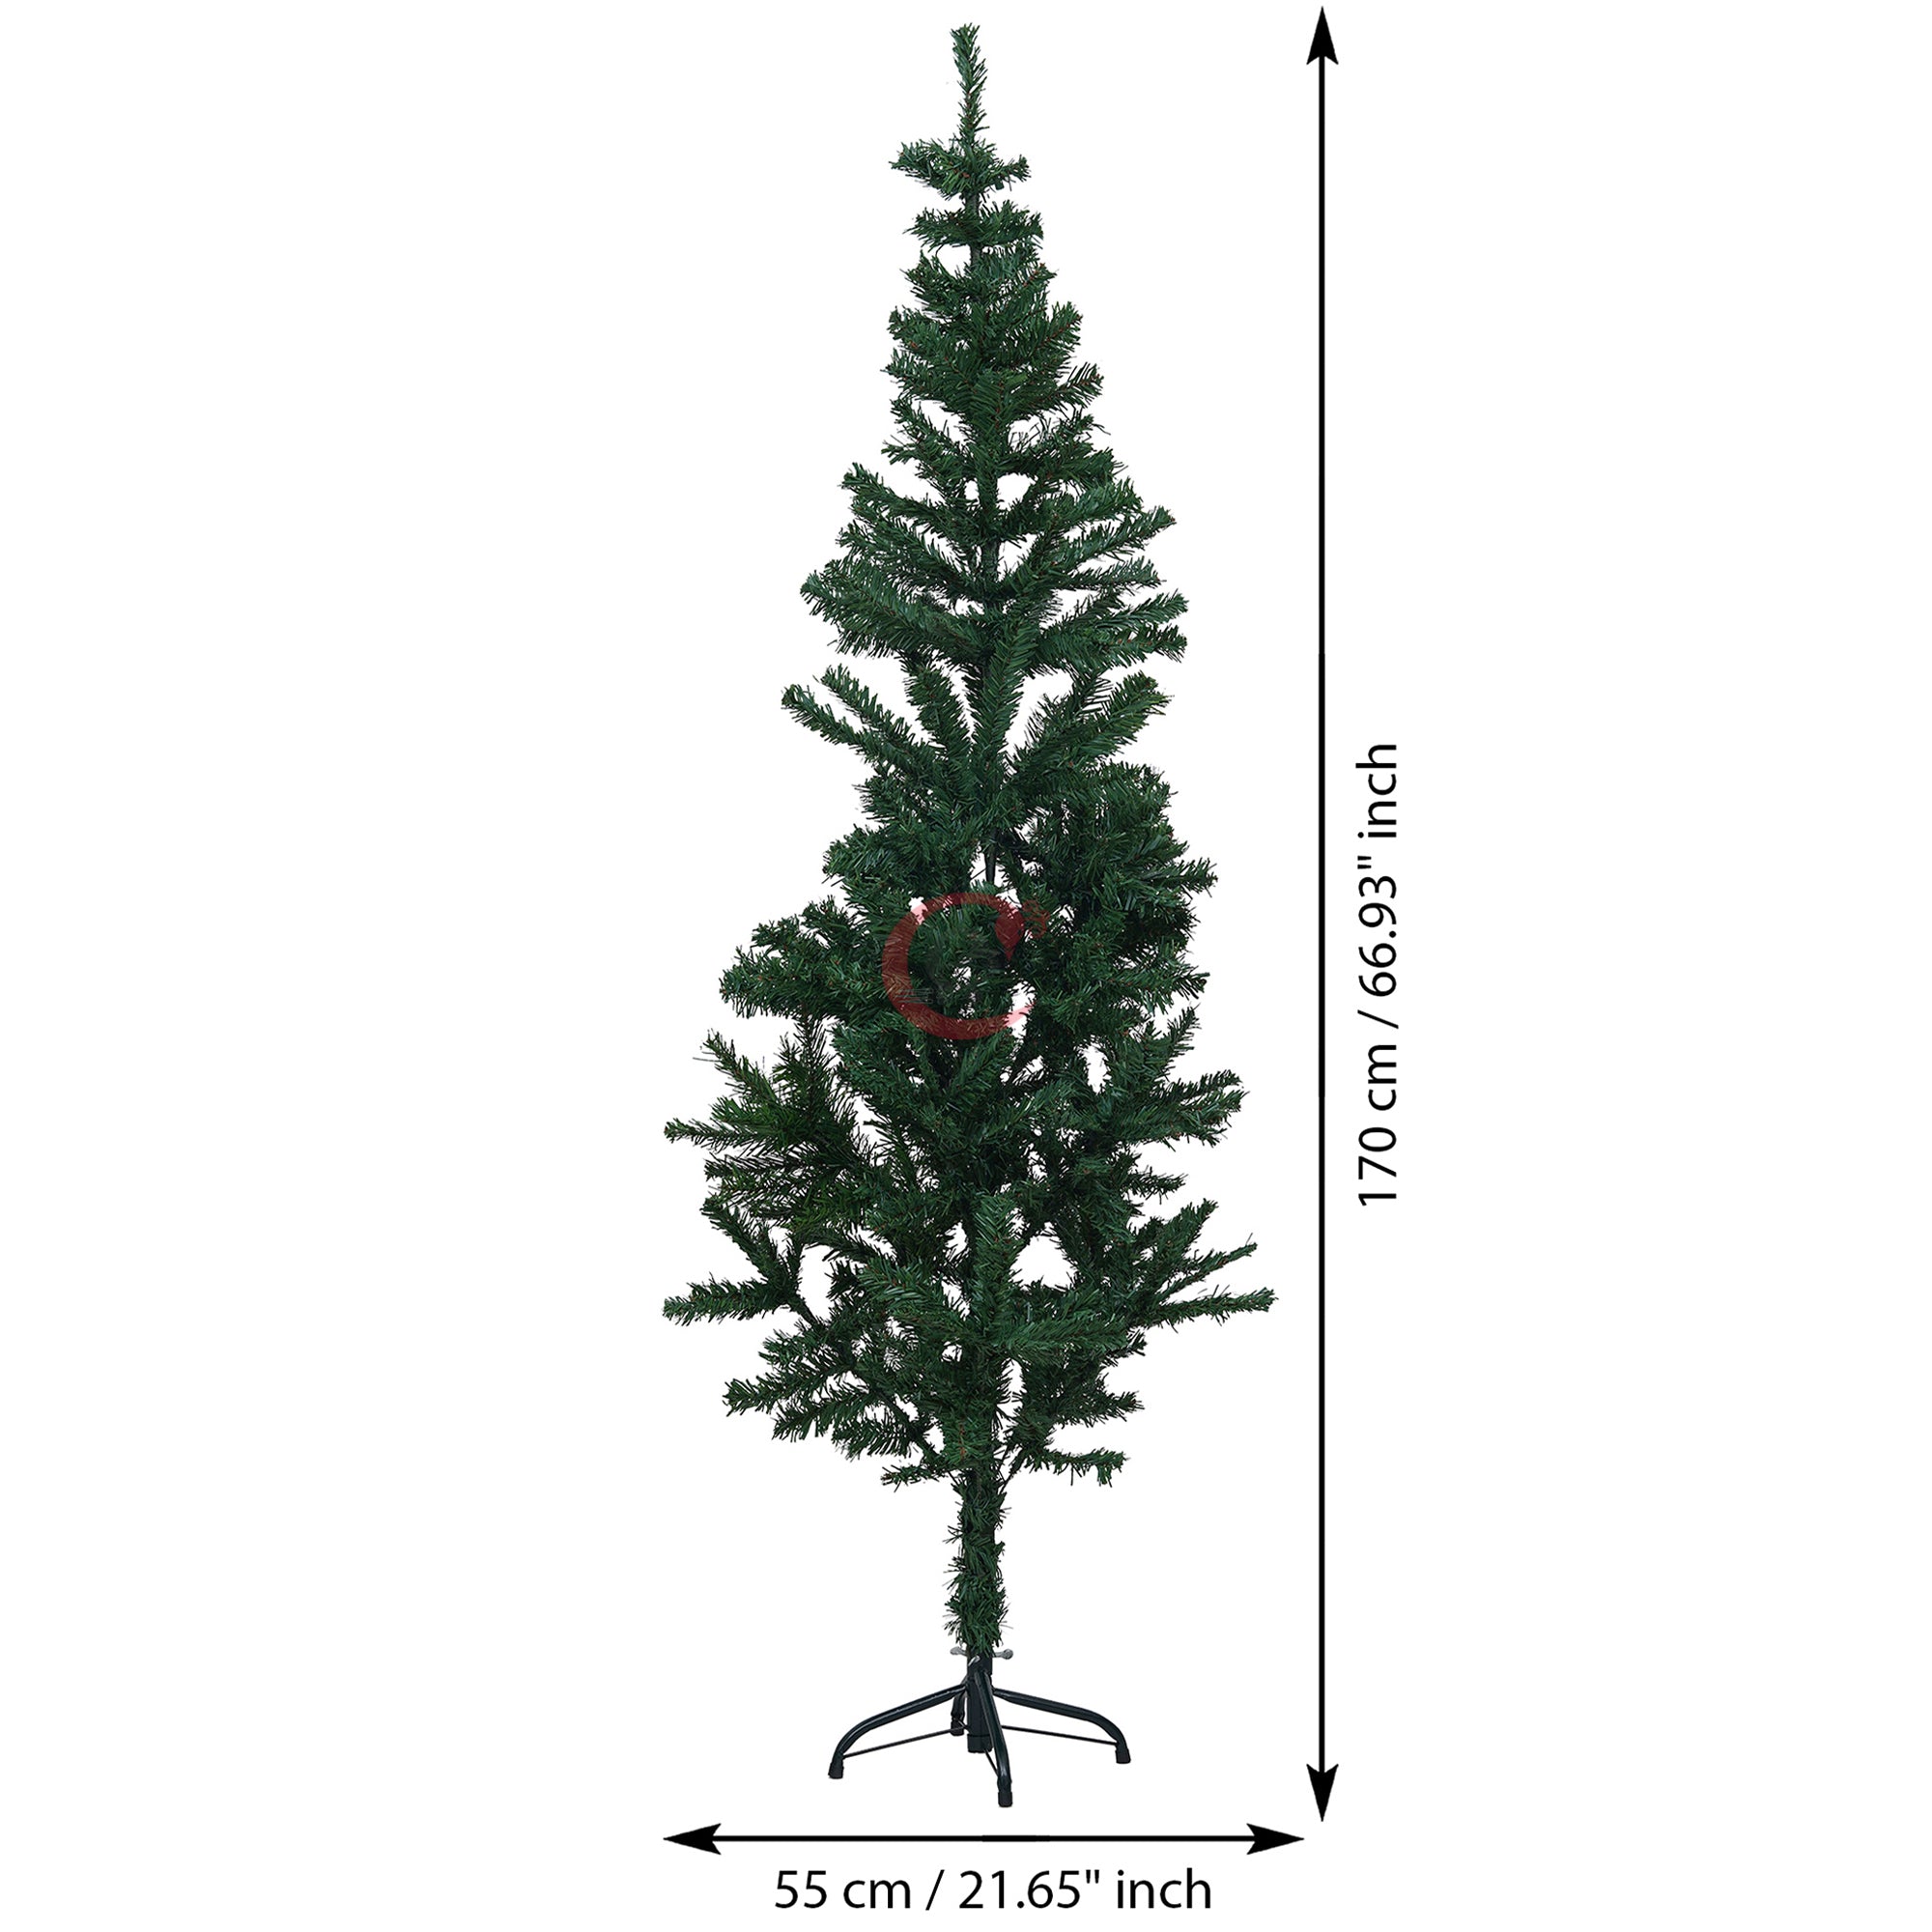 eCraftIndia 6 Feet Green Artificial Christmas Tree Xmas Pine Tree with Metal Stand - Xmas Tree for Indoor, Outdoor, Home, Living Room, Office, Church Decor - Merry Christmas Decoration Item 3